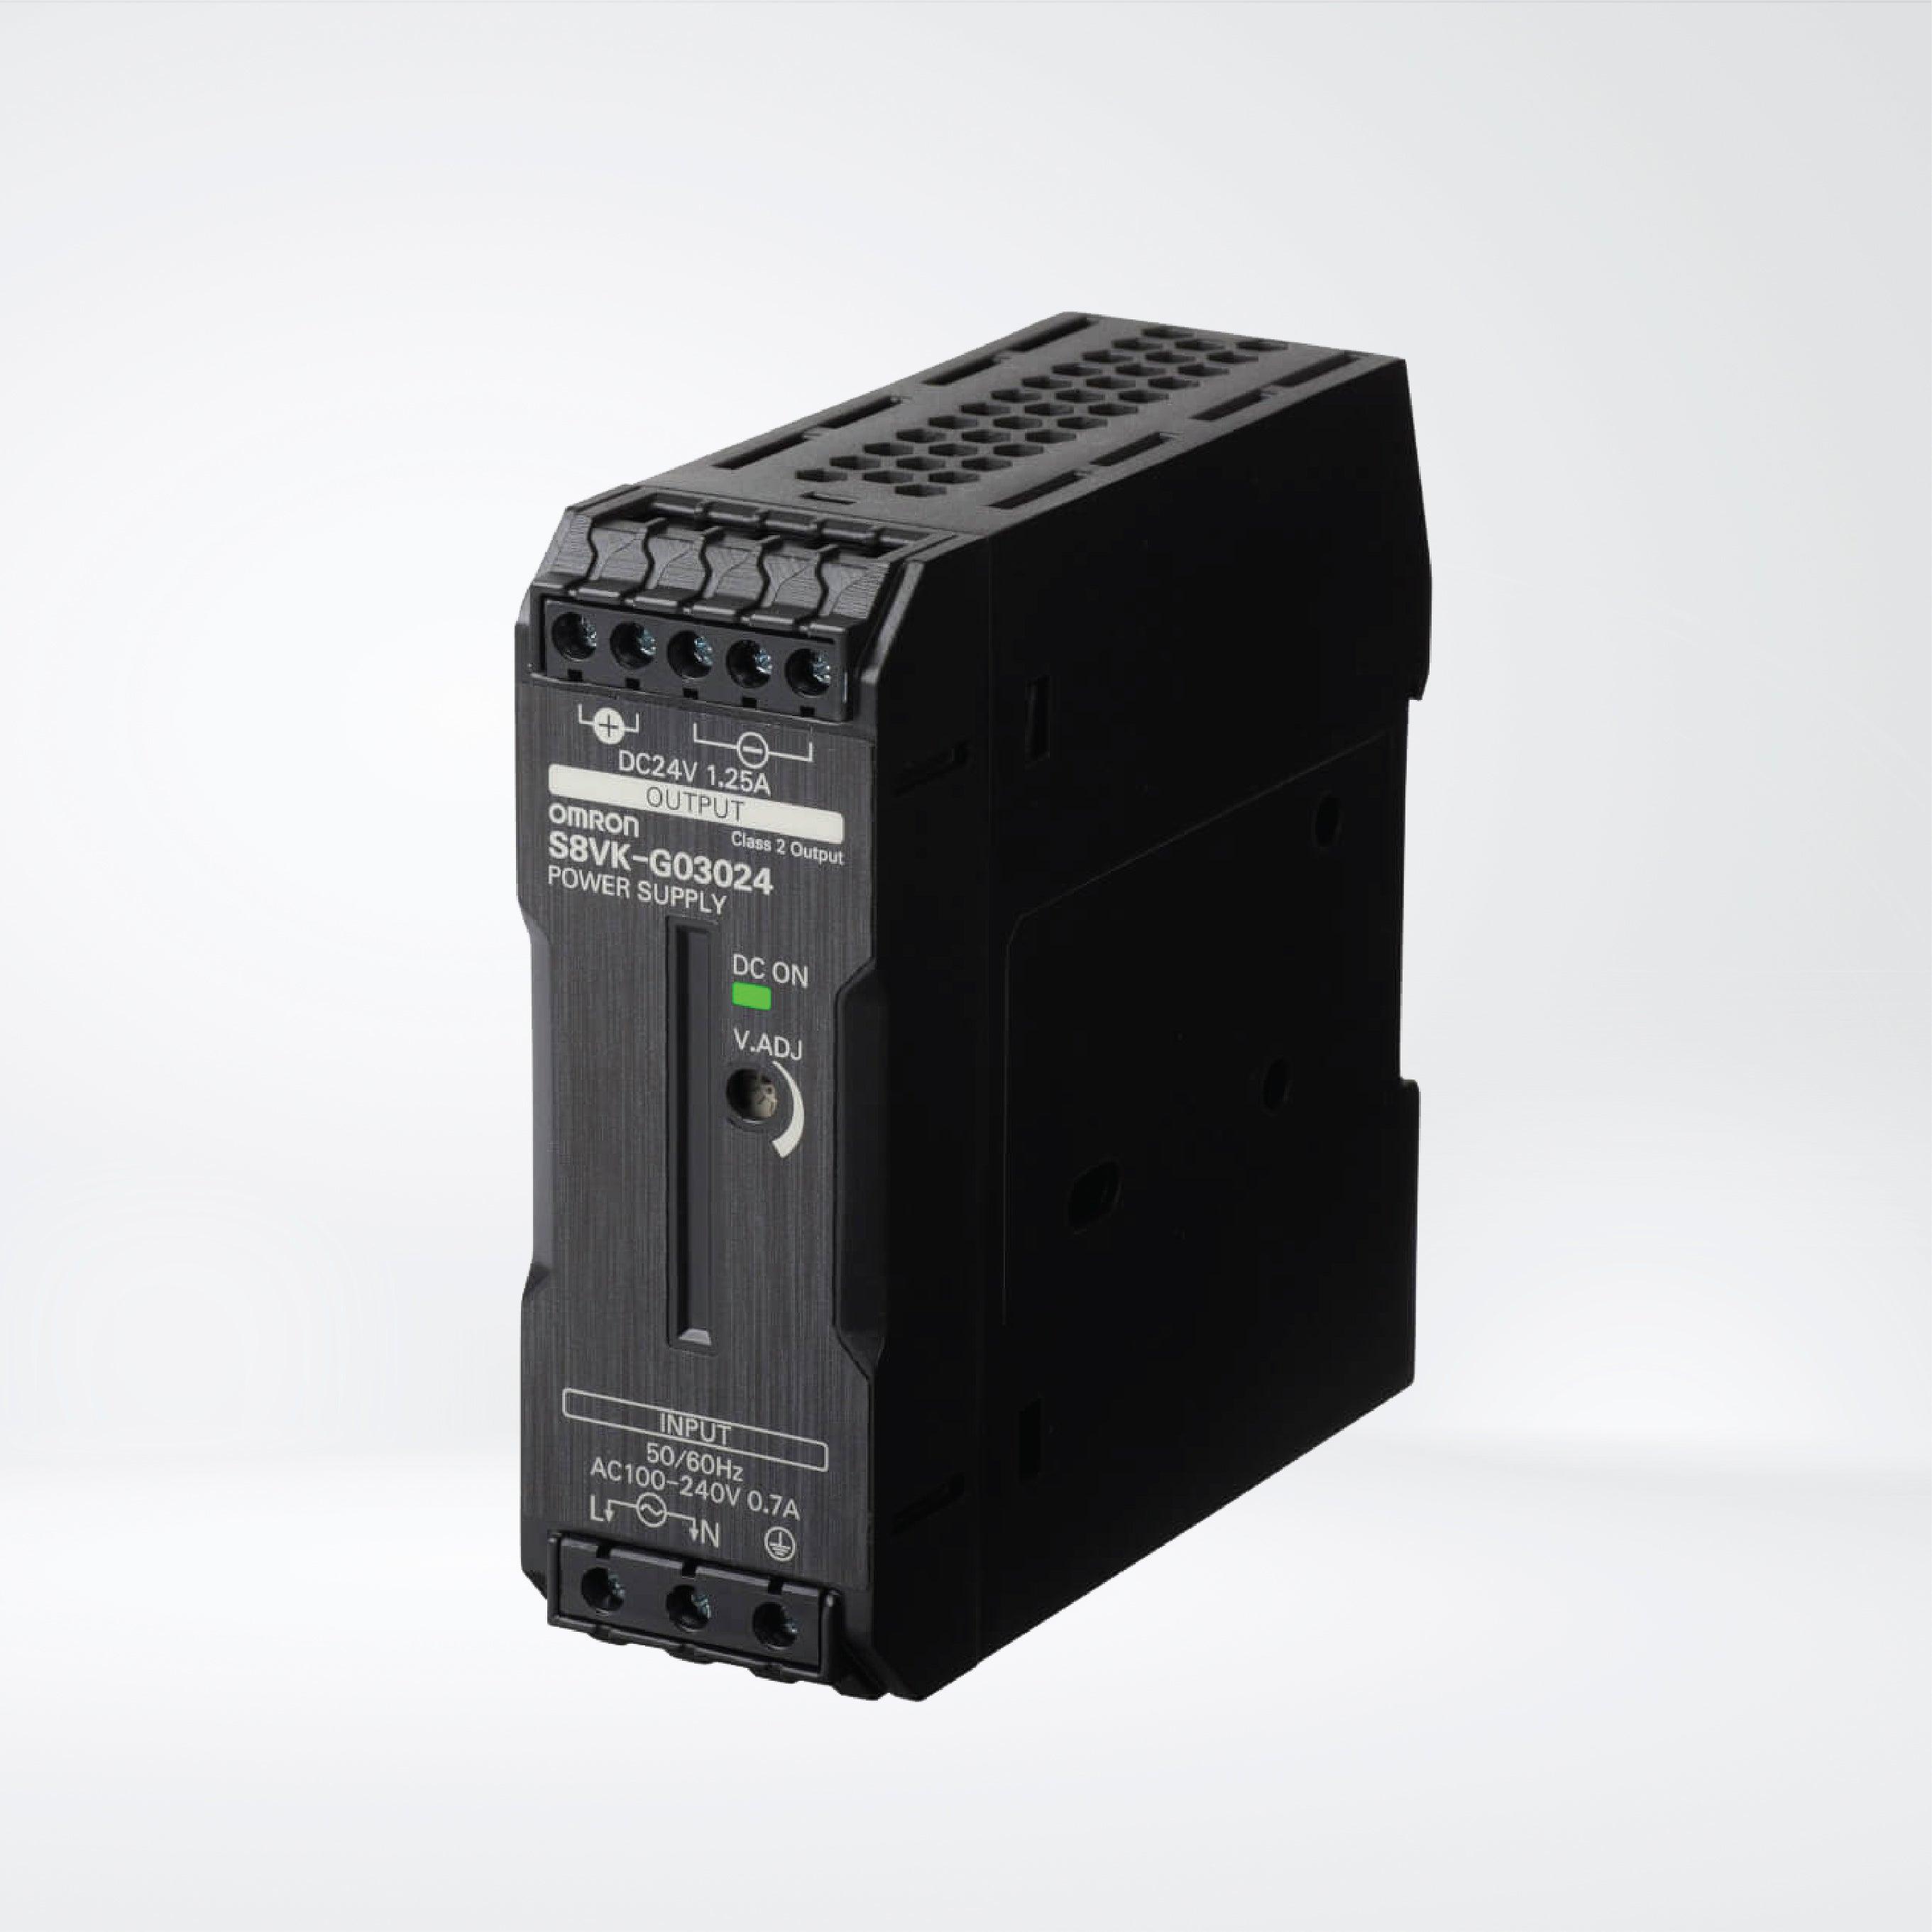 S8VK-G03005 Switch Mode Power Supply , 30W , 5VDC , standard with single-phase input - Riverplus